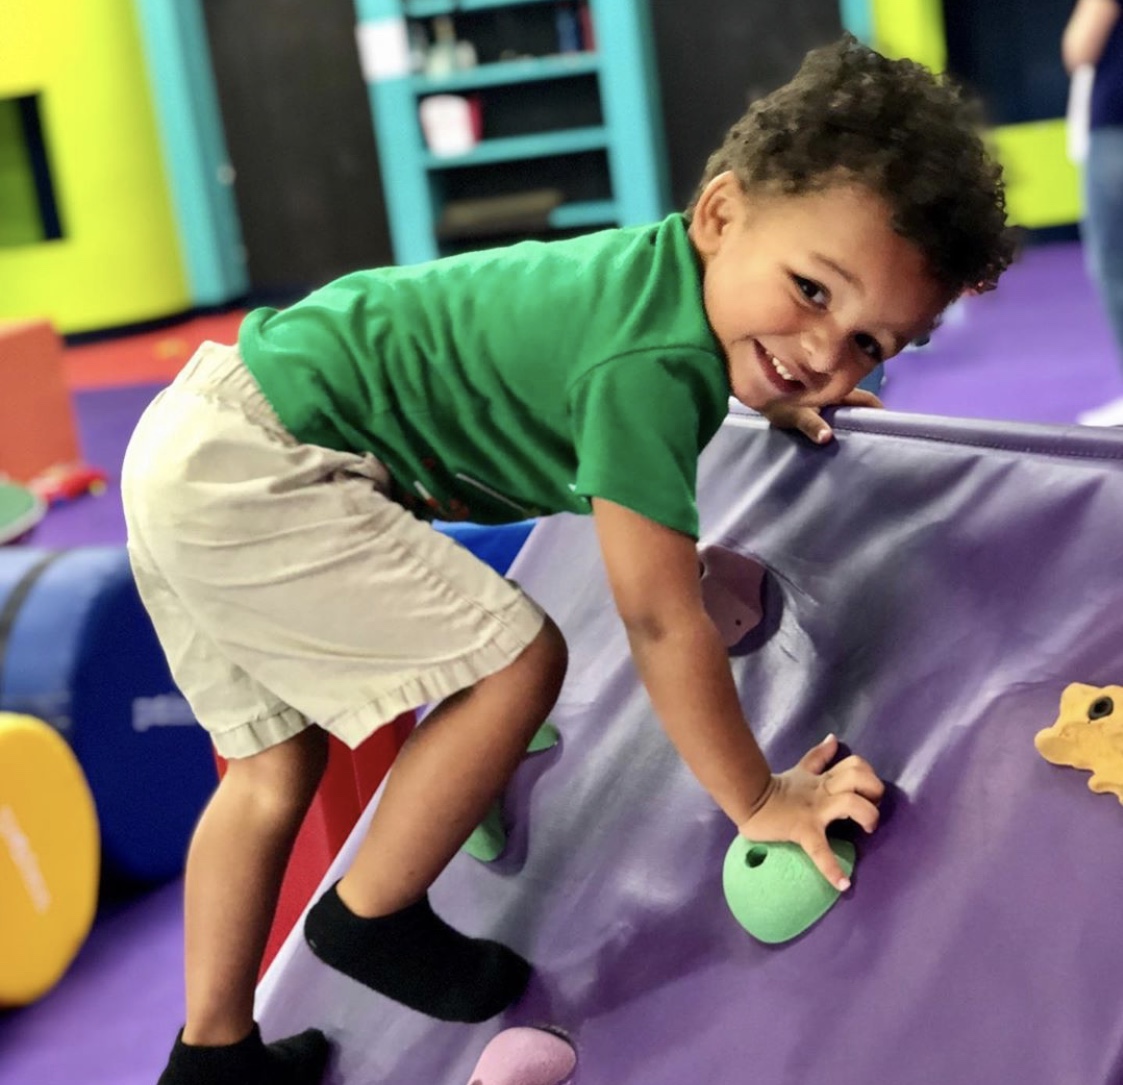 This sweet, smiling tot loves our toddler classes in St. Petersburg.